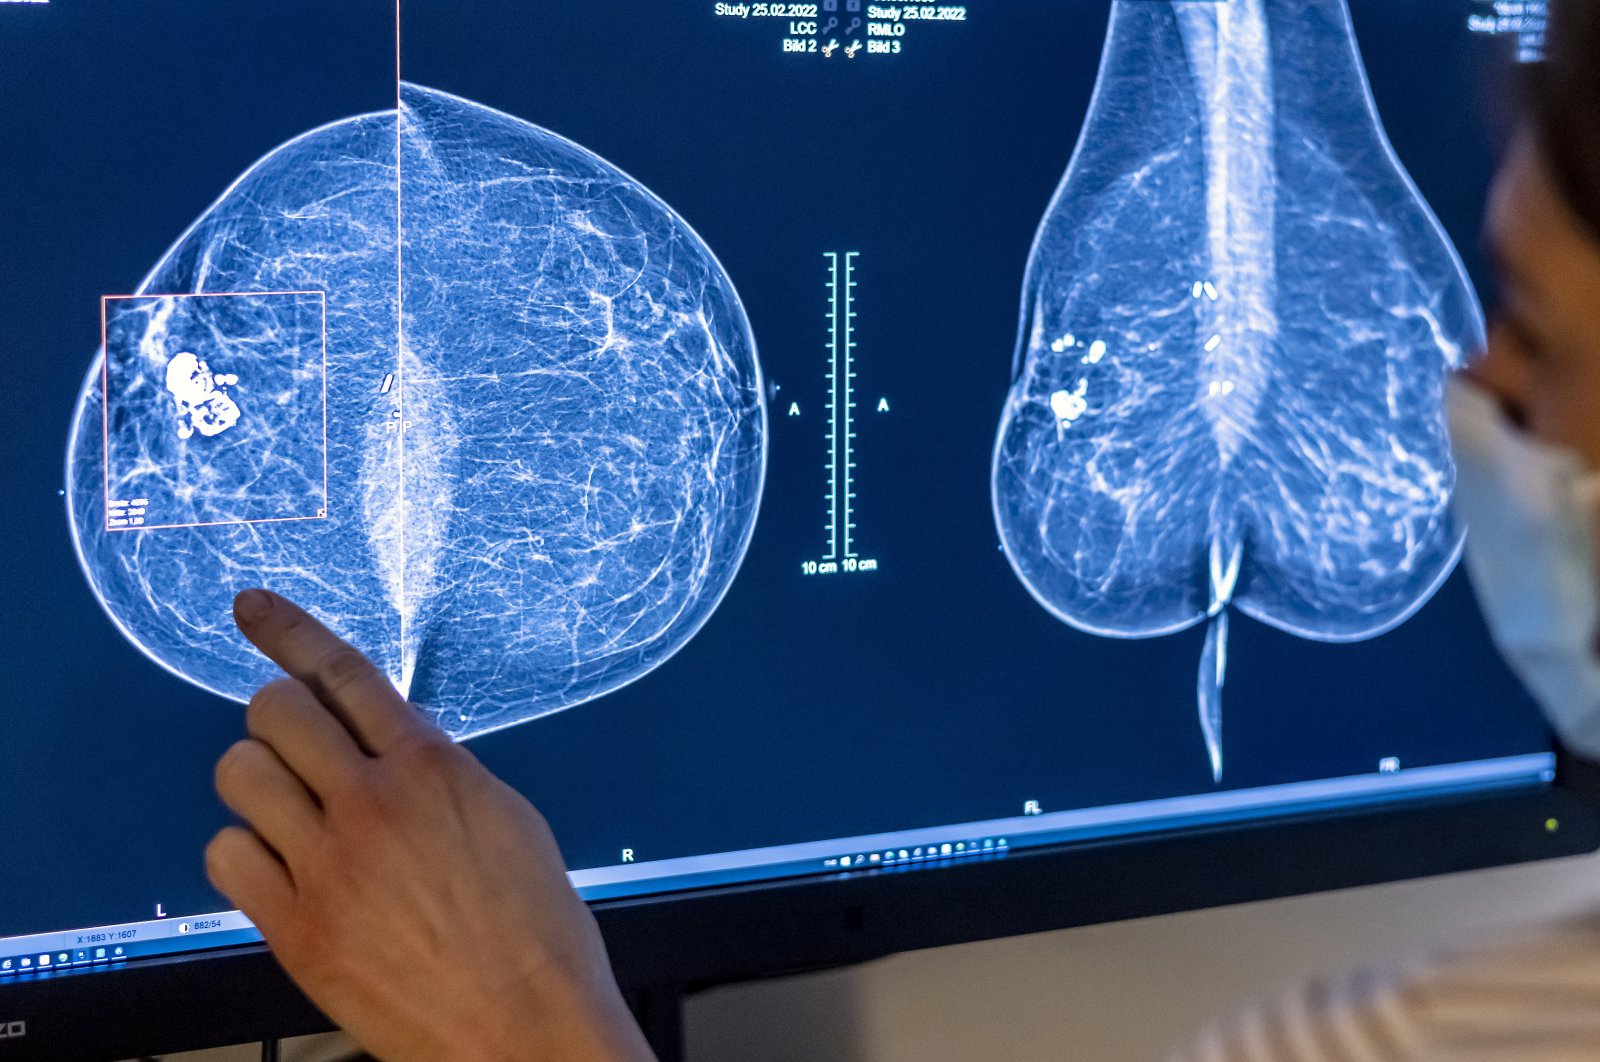 Doctors and scientists from Sweden&#039;s Lund University have found that AI-supported mammography screening &quot;almost halved radiologist workload&quot; during a randomized trial under a Swedish national breast cancer screening program. (dpa Photo)